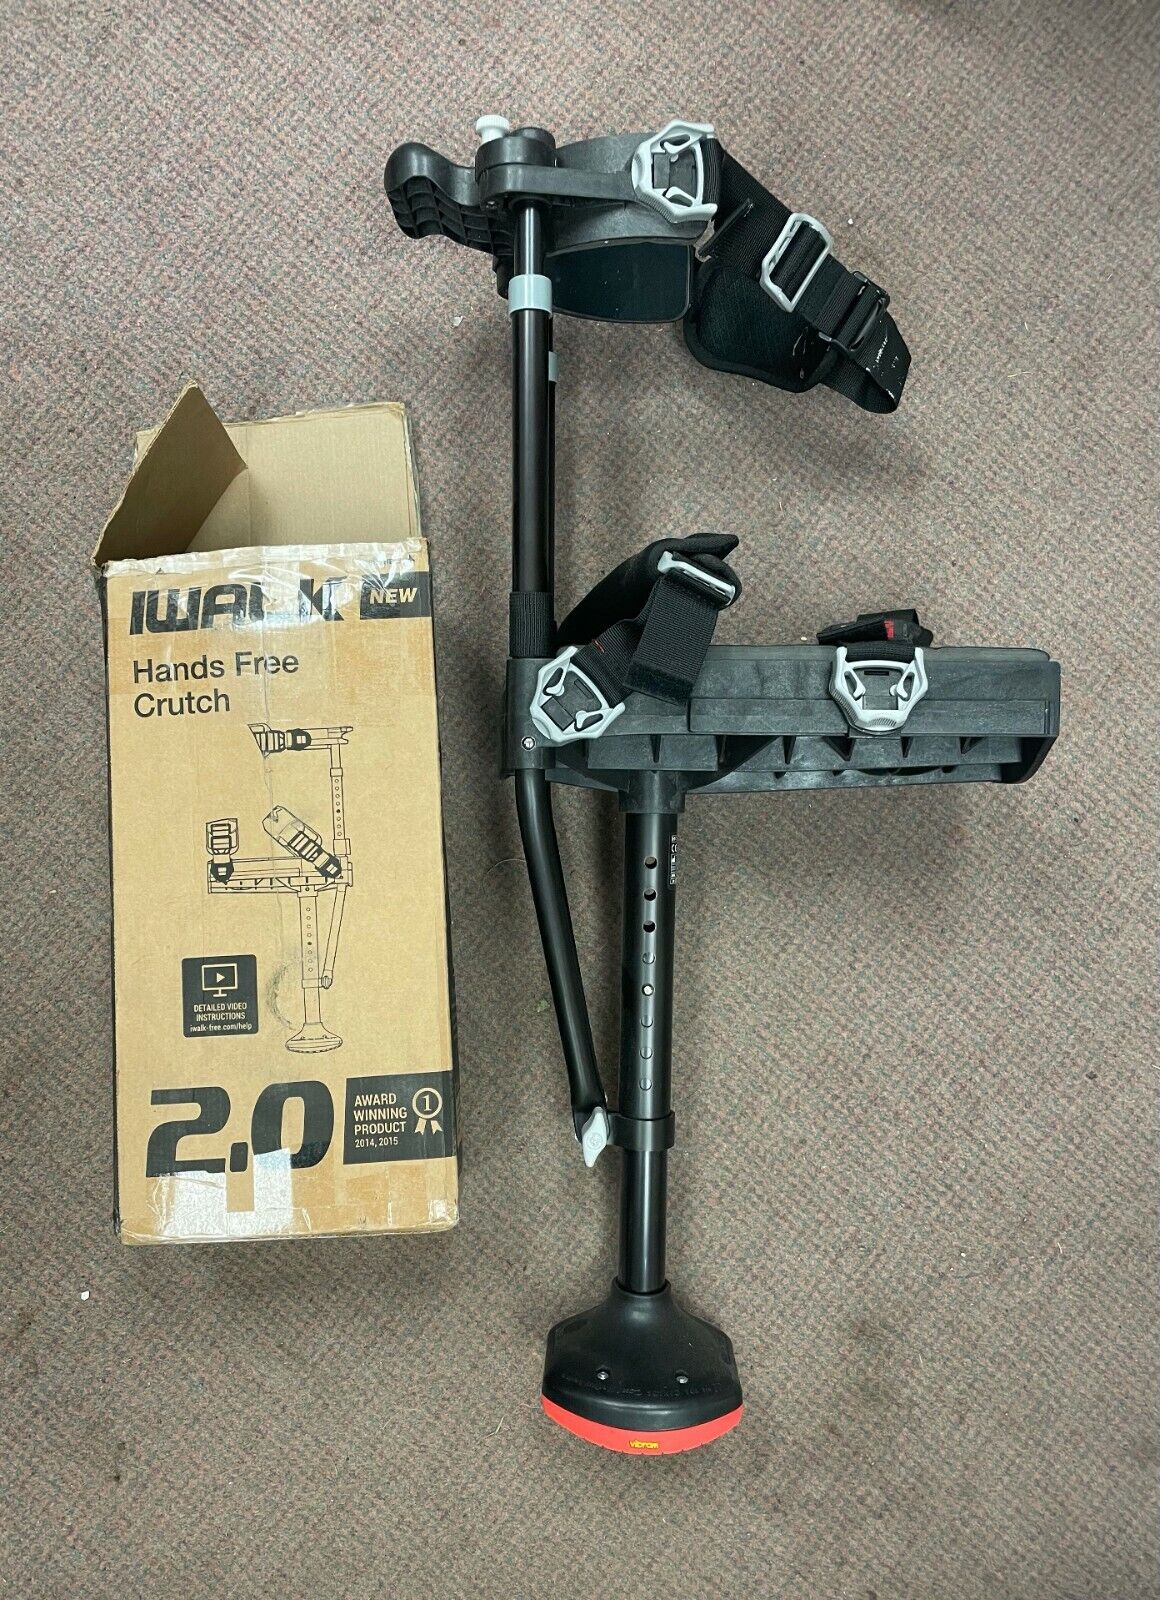 iWALK2.0 Hands Free Knee Crutch - new without tags